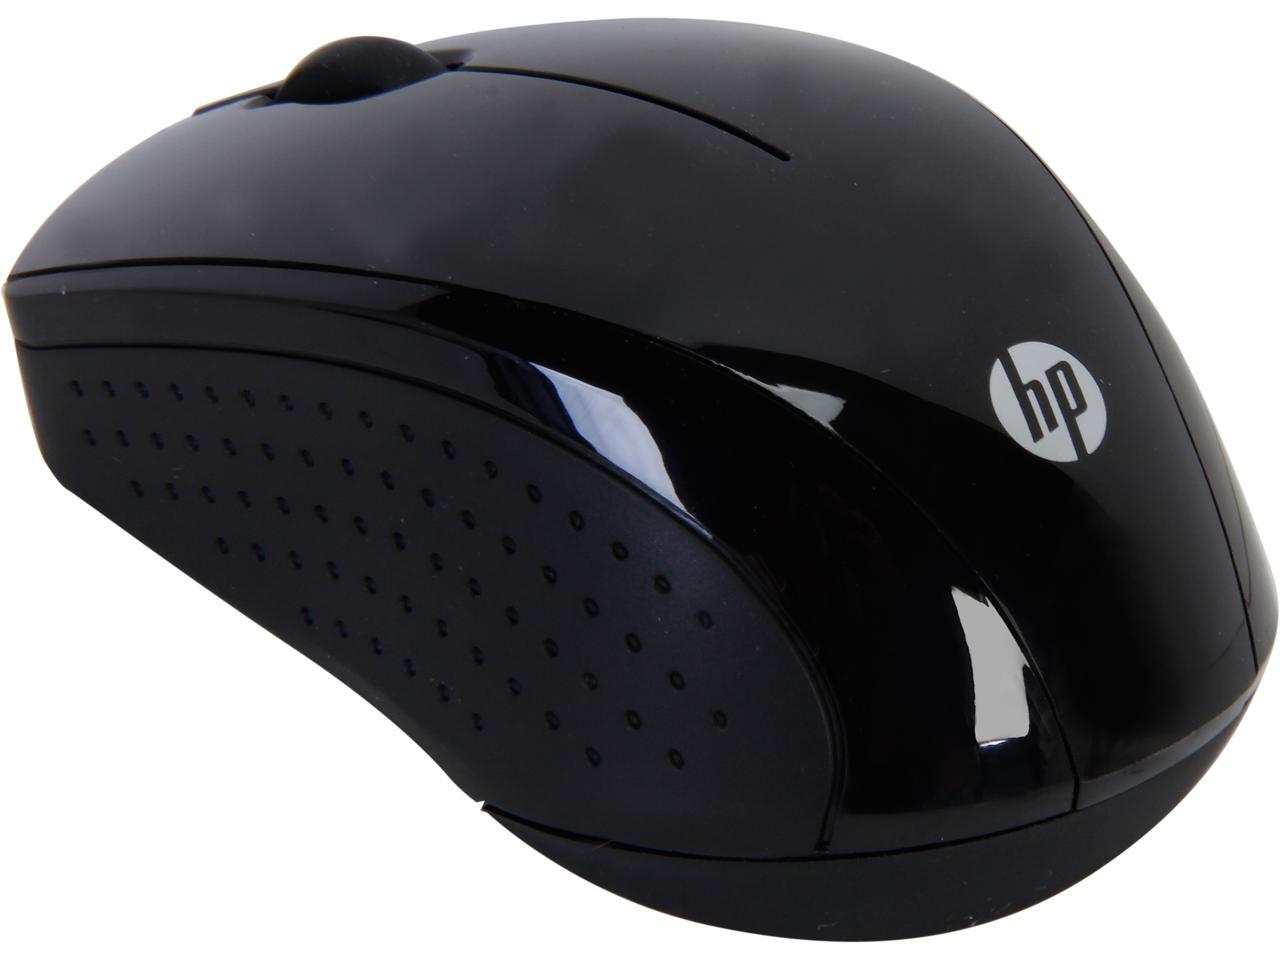 hp wireless mouse x3000 lag